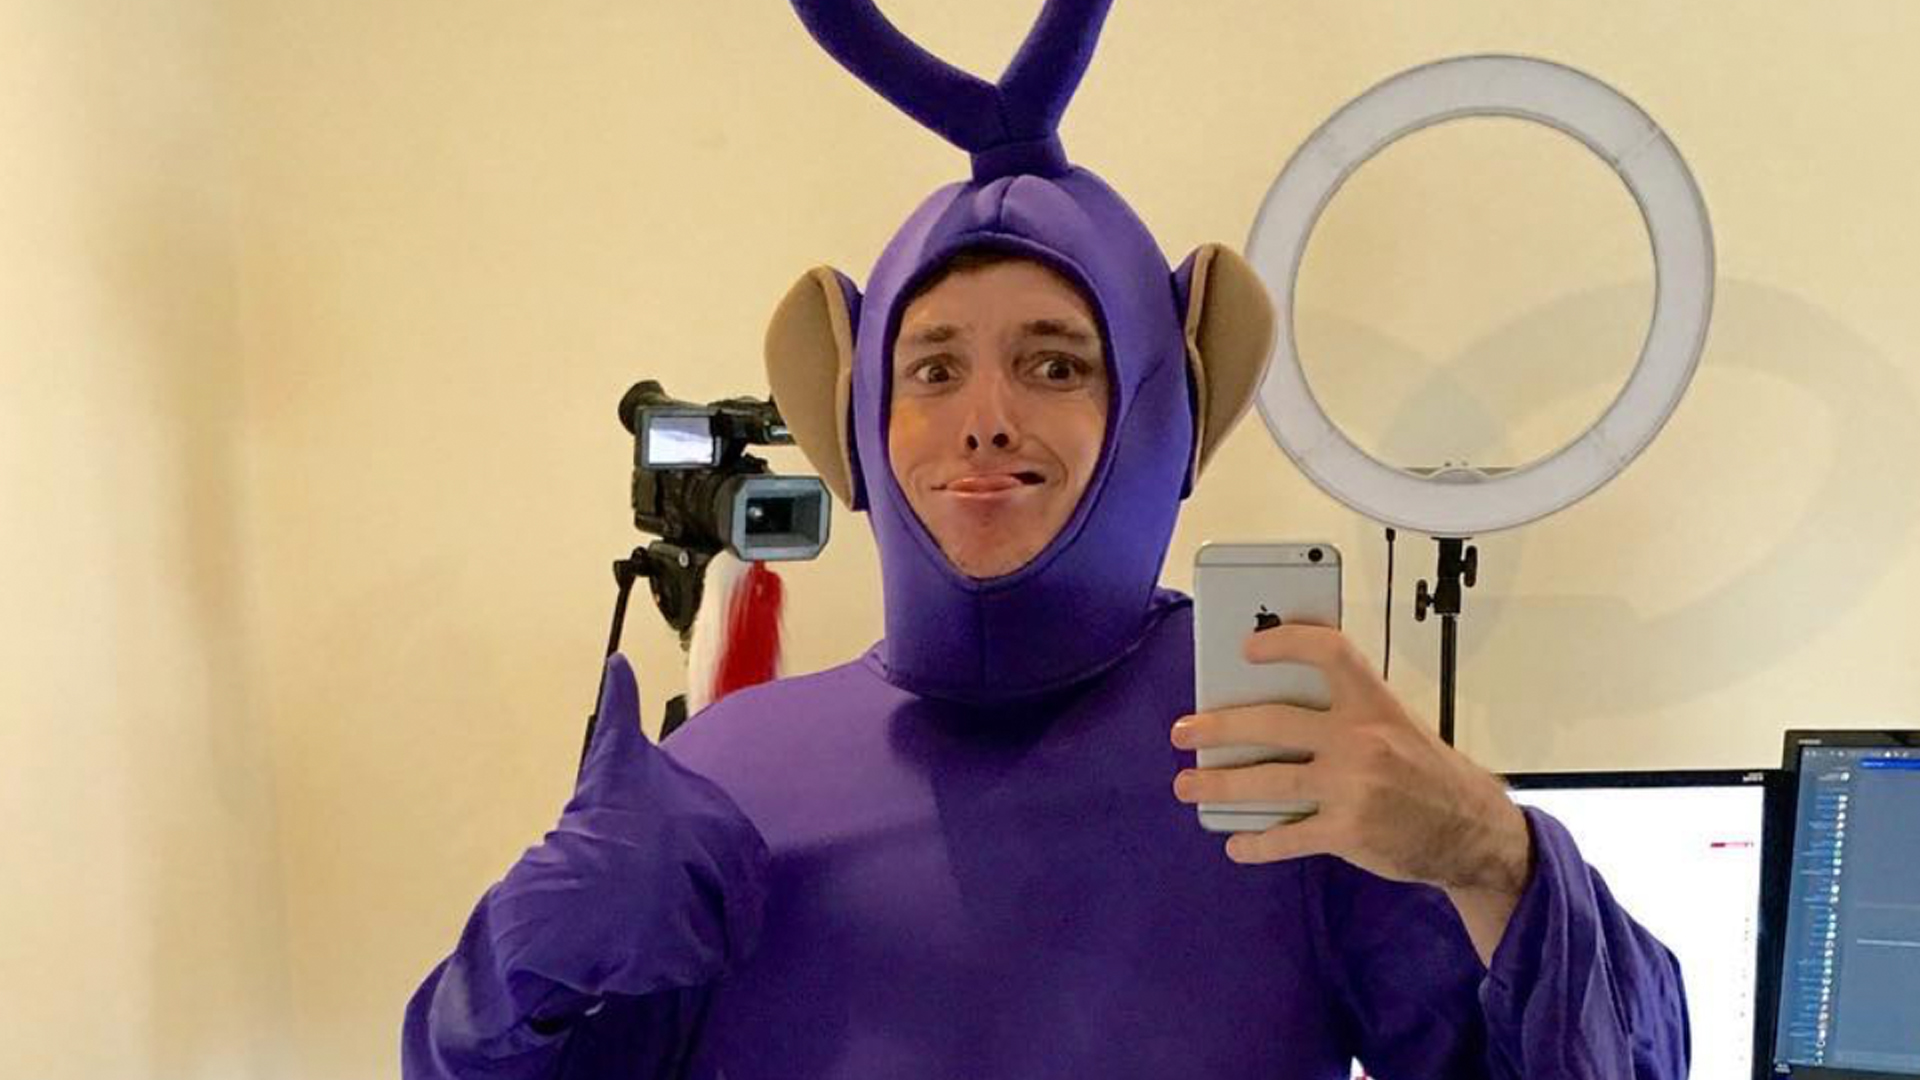 LazarBeam dressed as a Teletubby